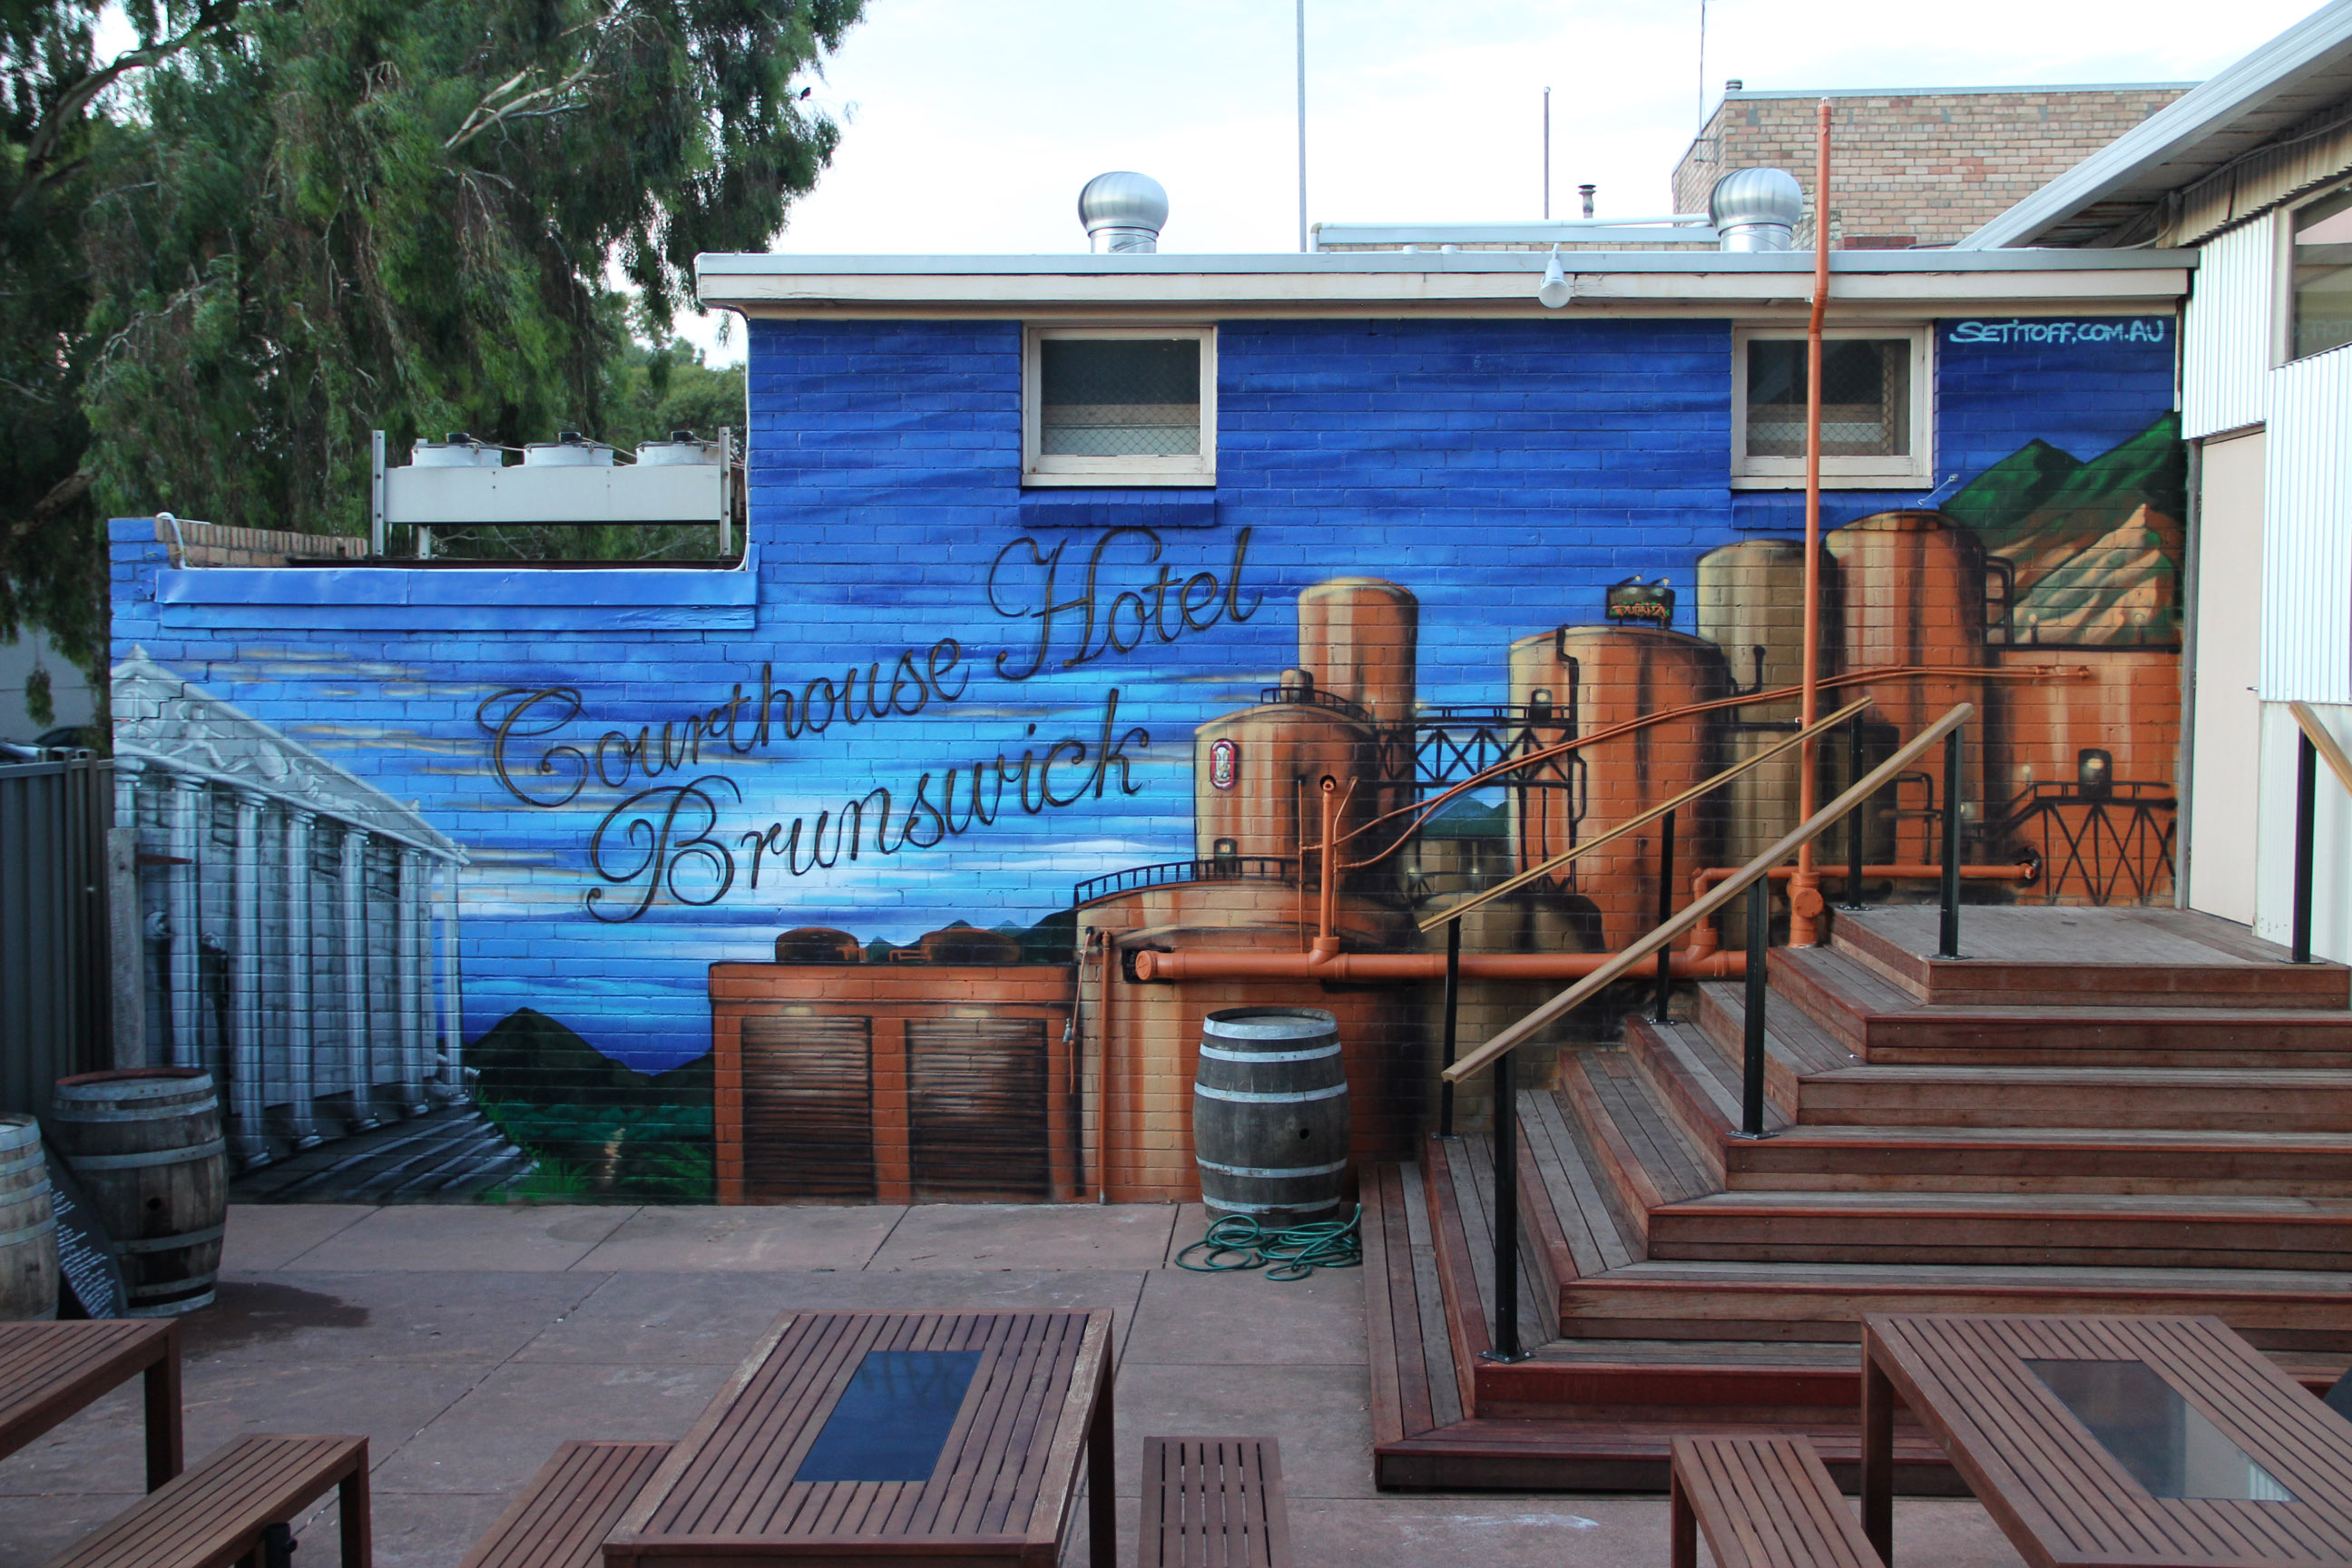 Courthouse hotel beer garden wall mural exterior